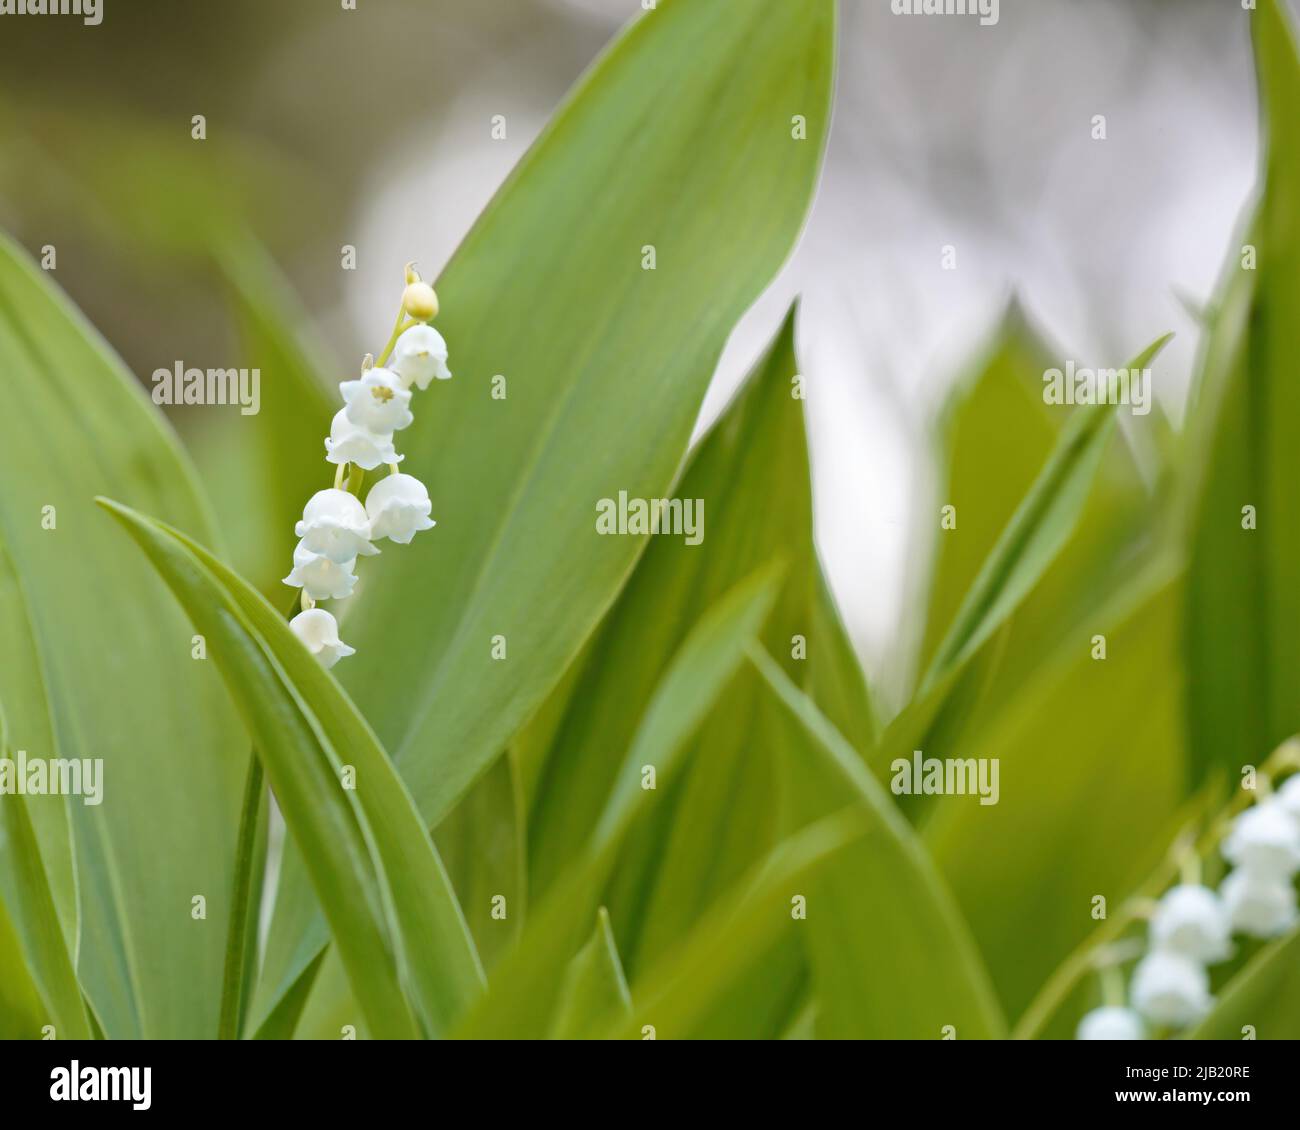 Beautiful fragile flowers of lily of the valley in bloom Stock Photo